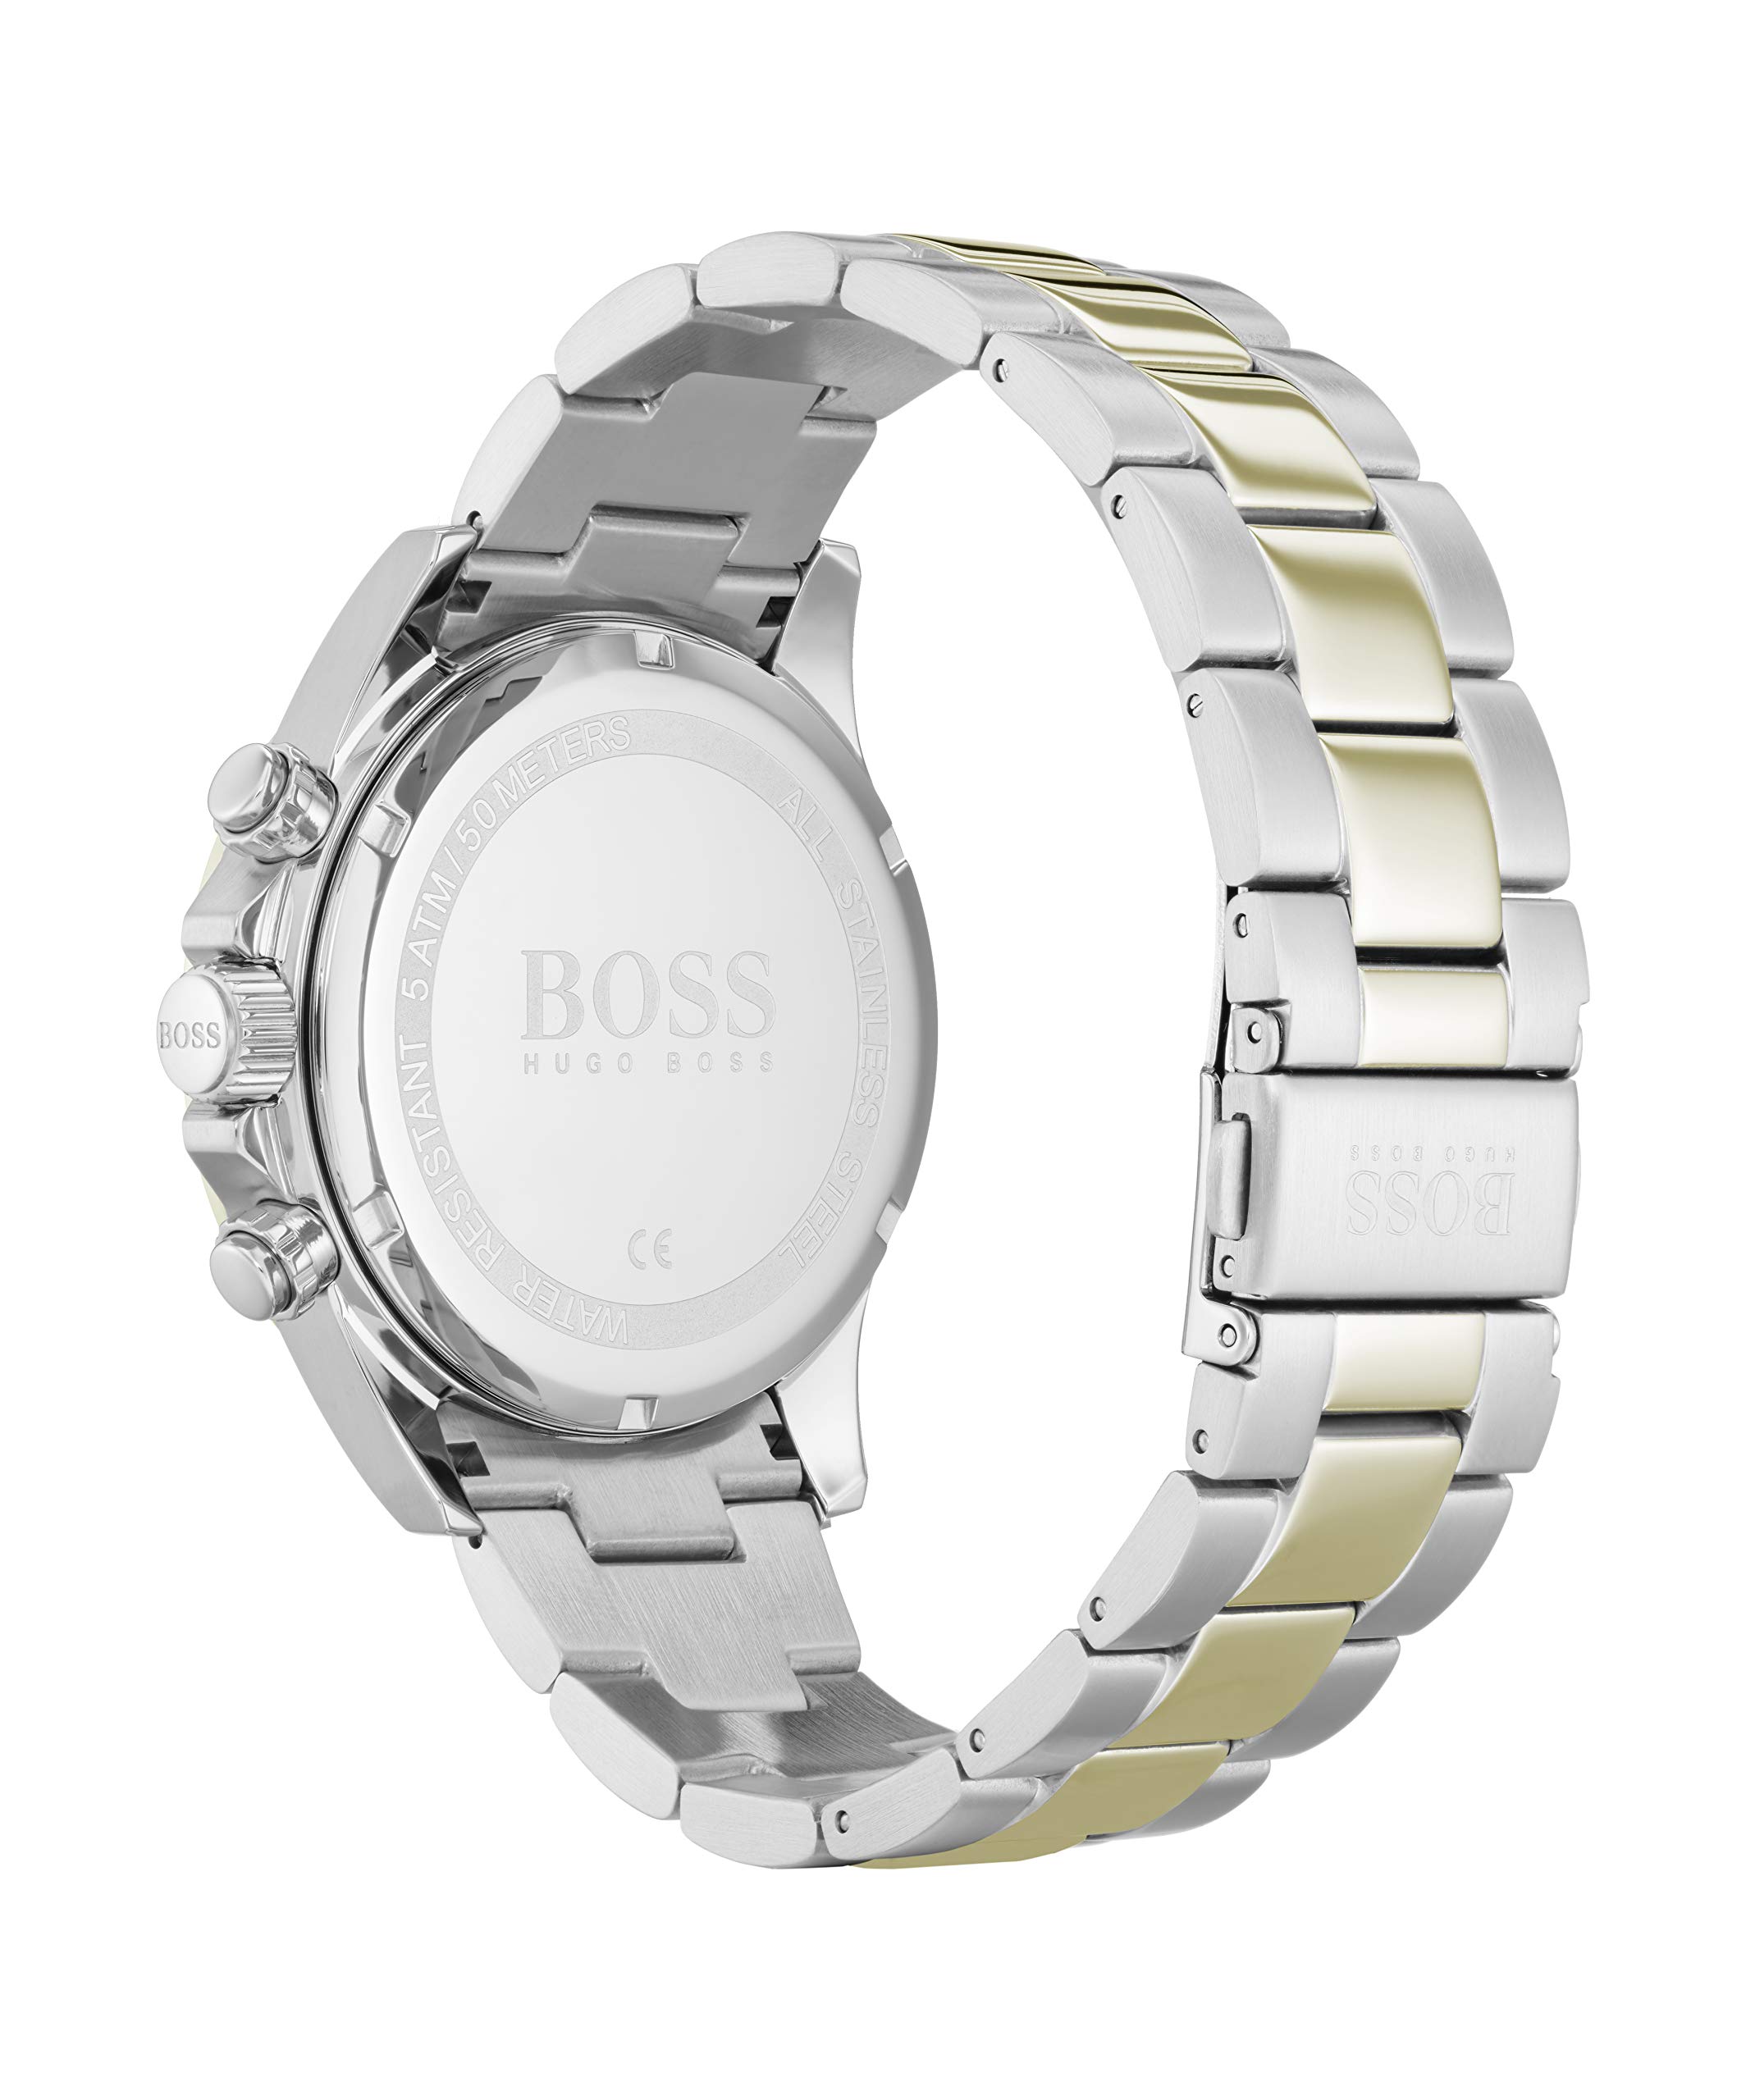 BOSS Men's Quartz Watch with Stainless Steel Strap, Two Tone, 22 (Model: 1513767)